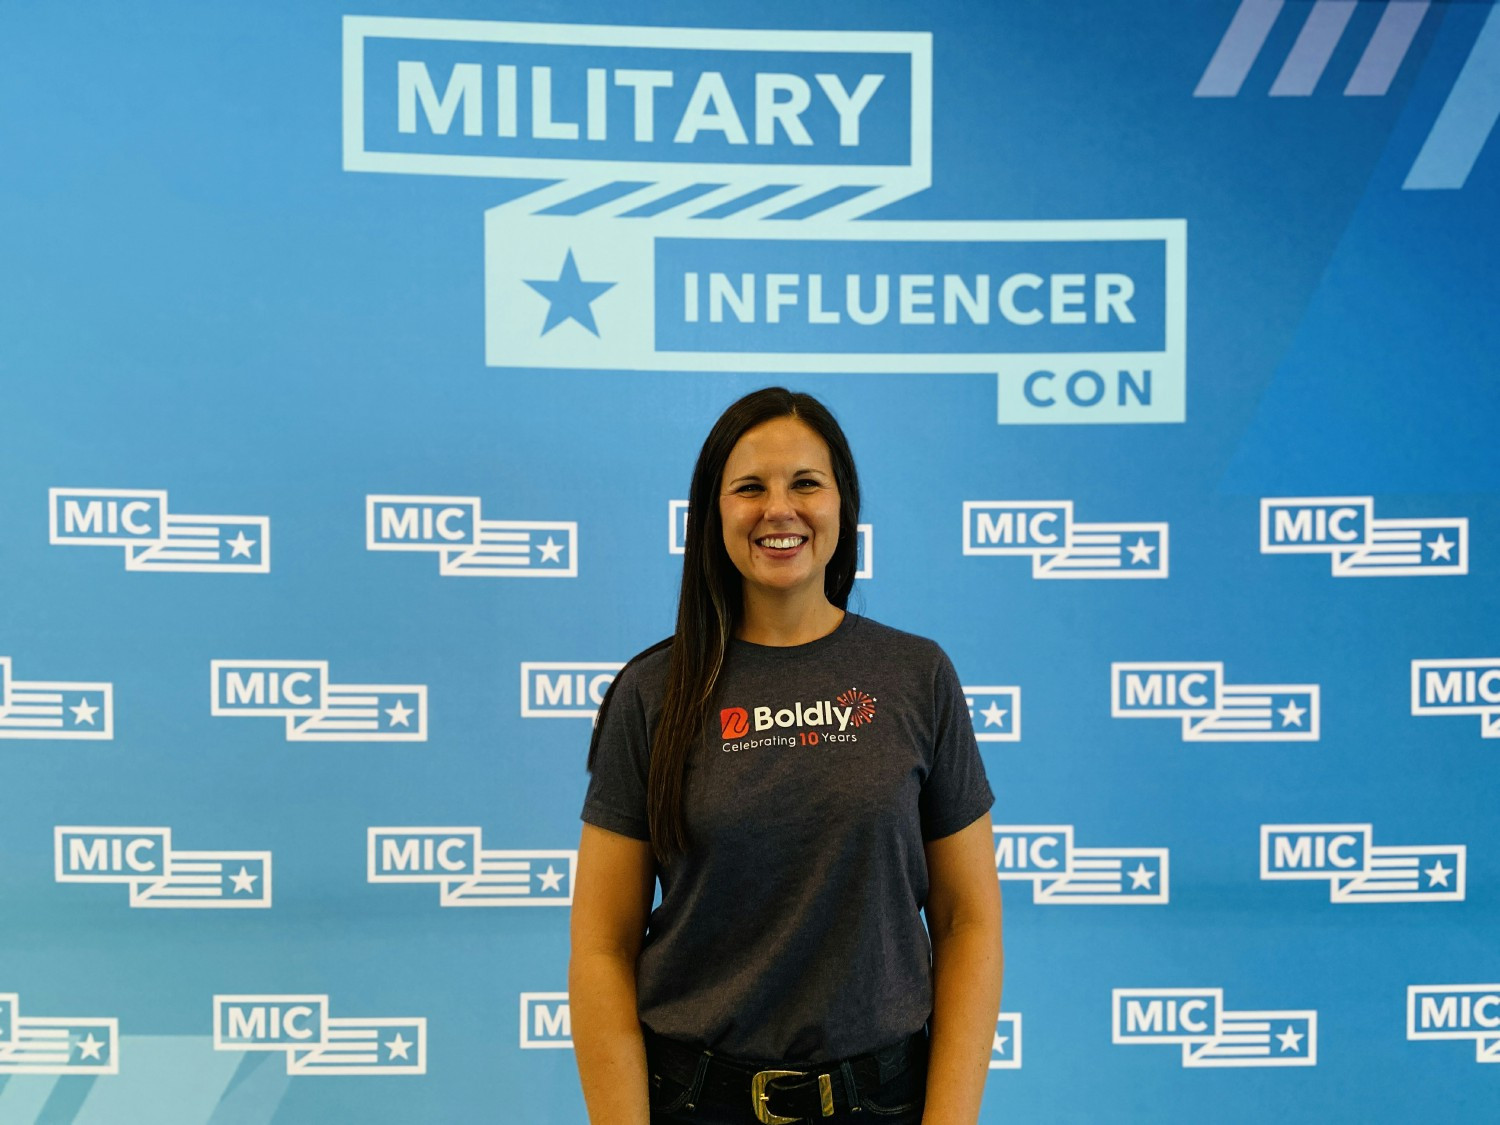 Our Military Spouse Advocate, Devin D, proudly represented Boldly at the Military Influencer Conference.